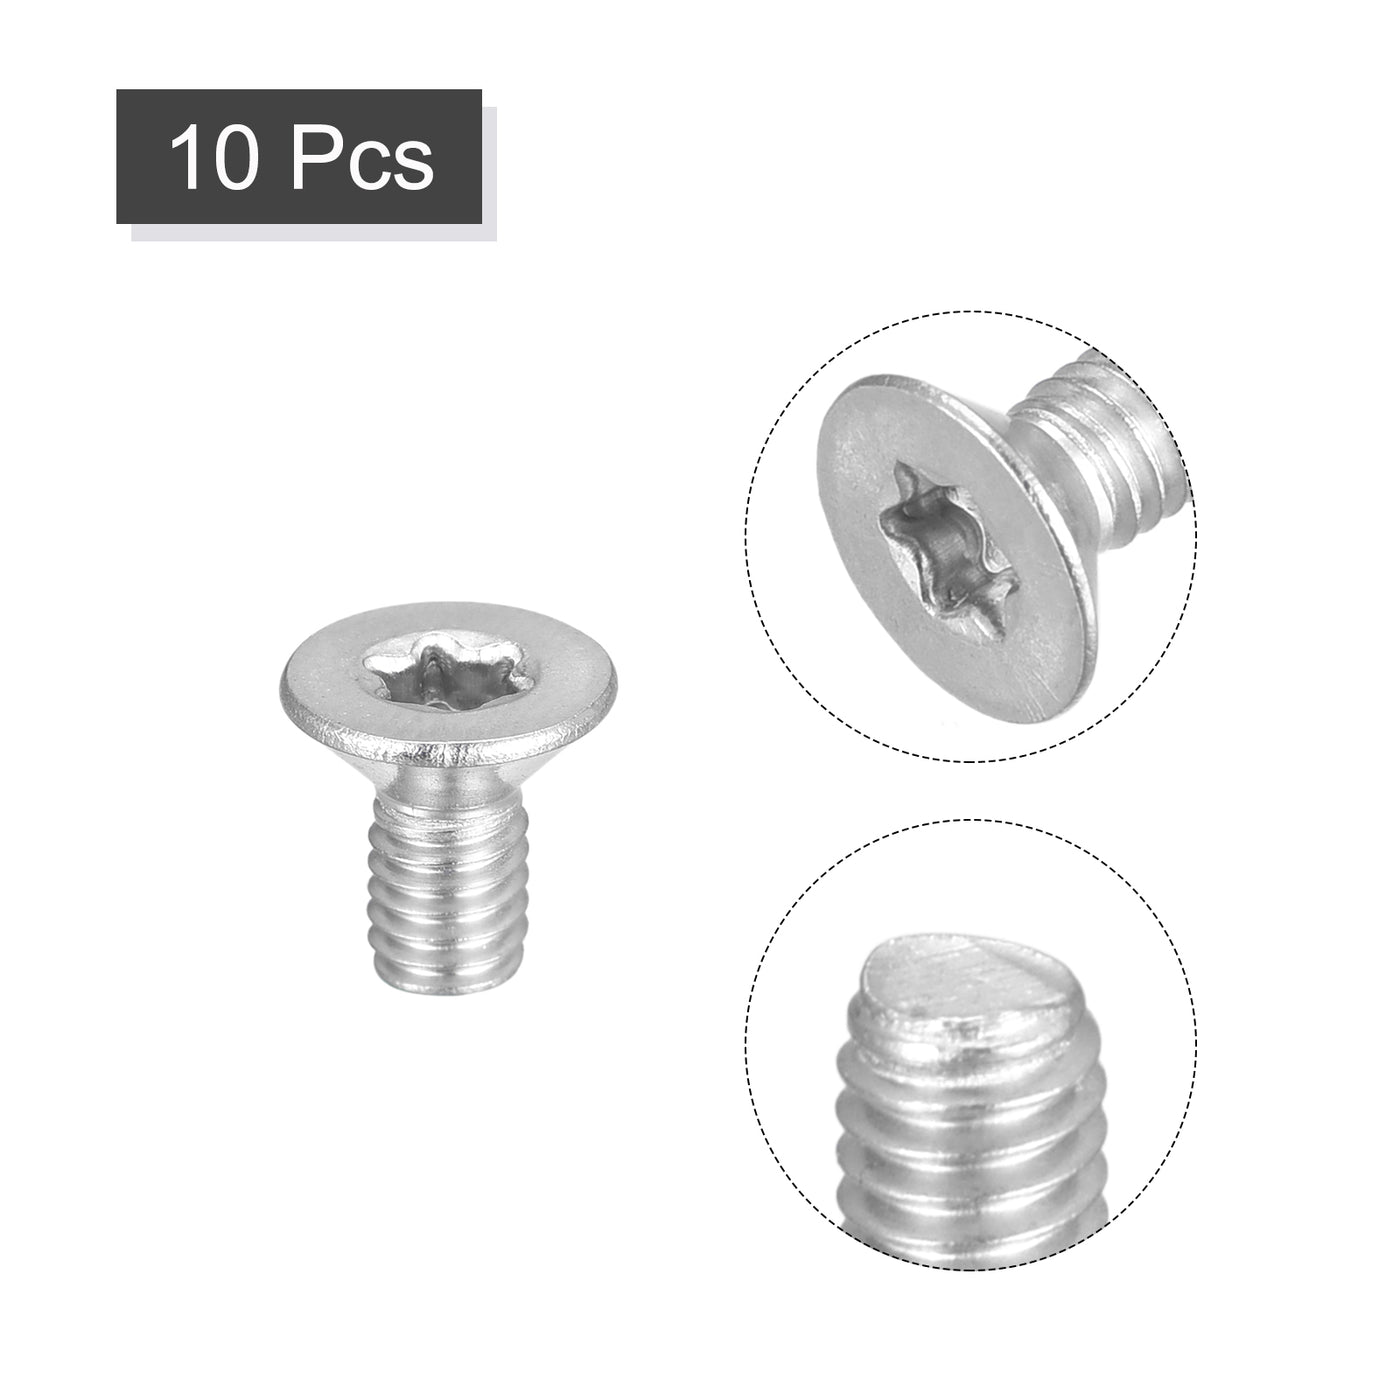 uxcell Uxcell M4x8mm Torx Security Screws, 10pcs 316 Stainless Steel Countersunk Head Screw